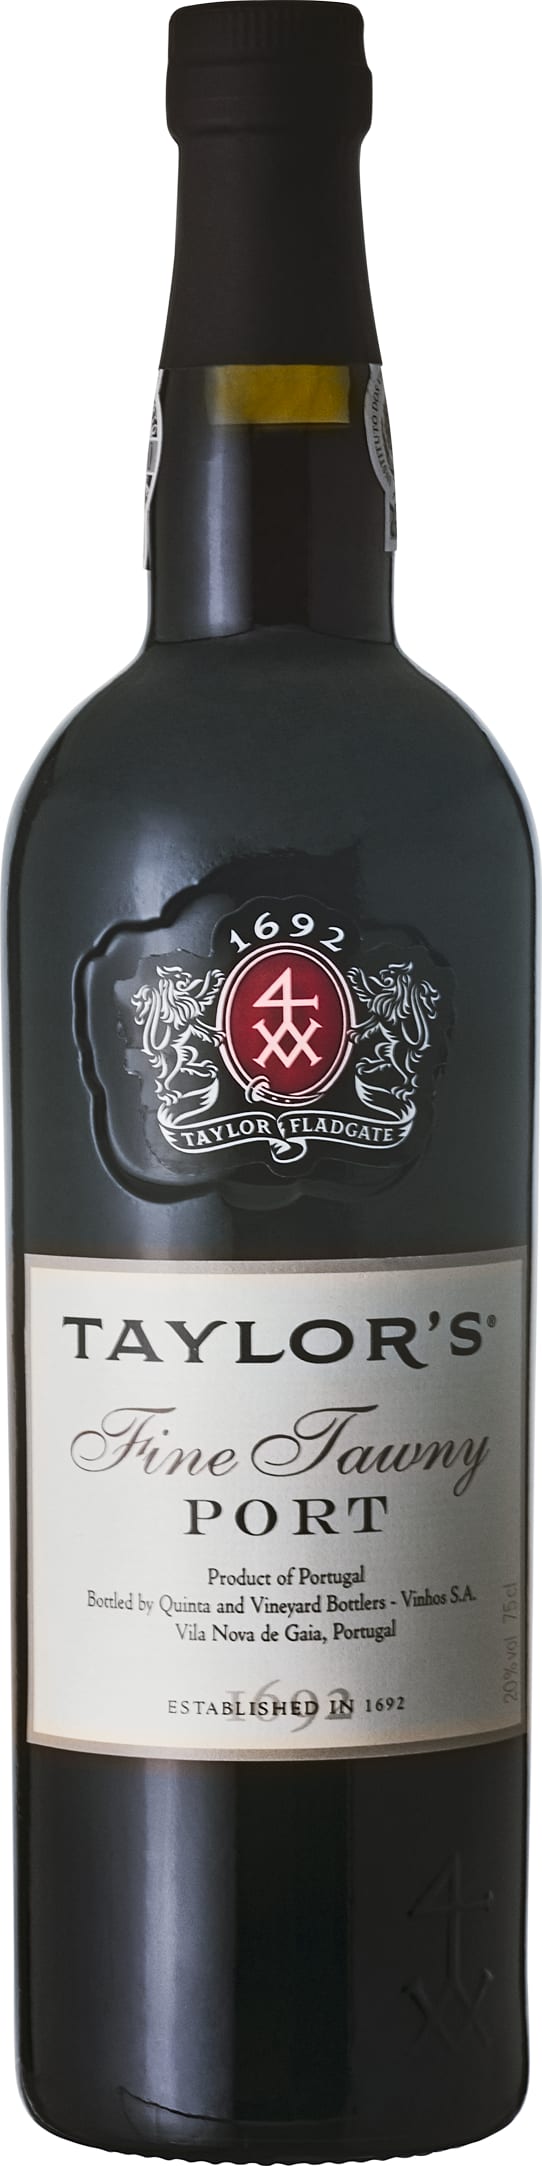 Taylor's Fine Tawny 75cl NV - Buy Taylor's Wines from GREAT WINES DIRECT wine shop